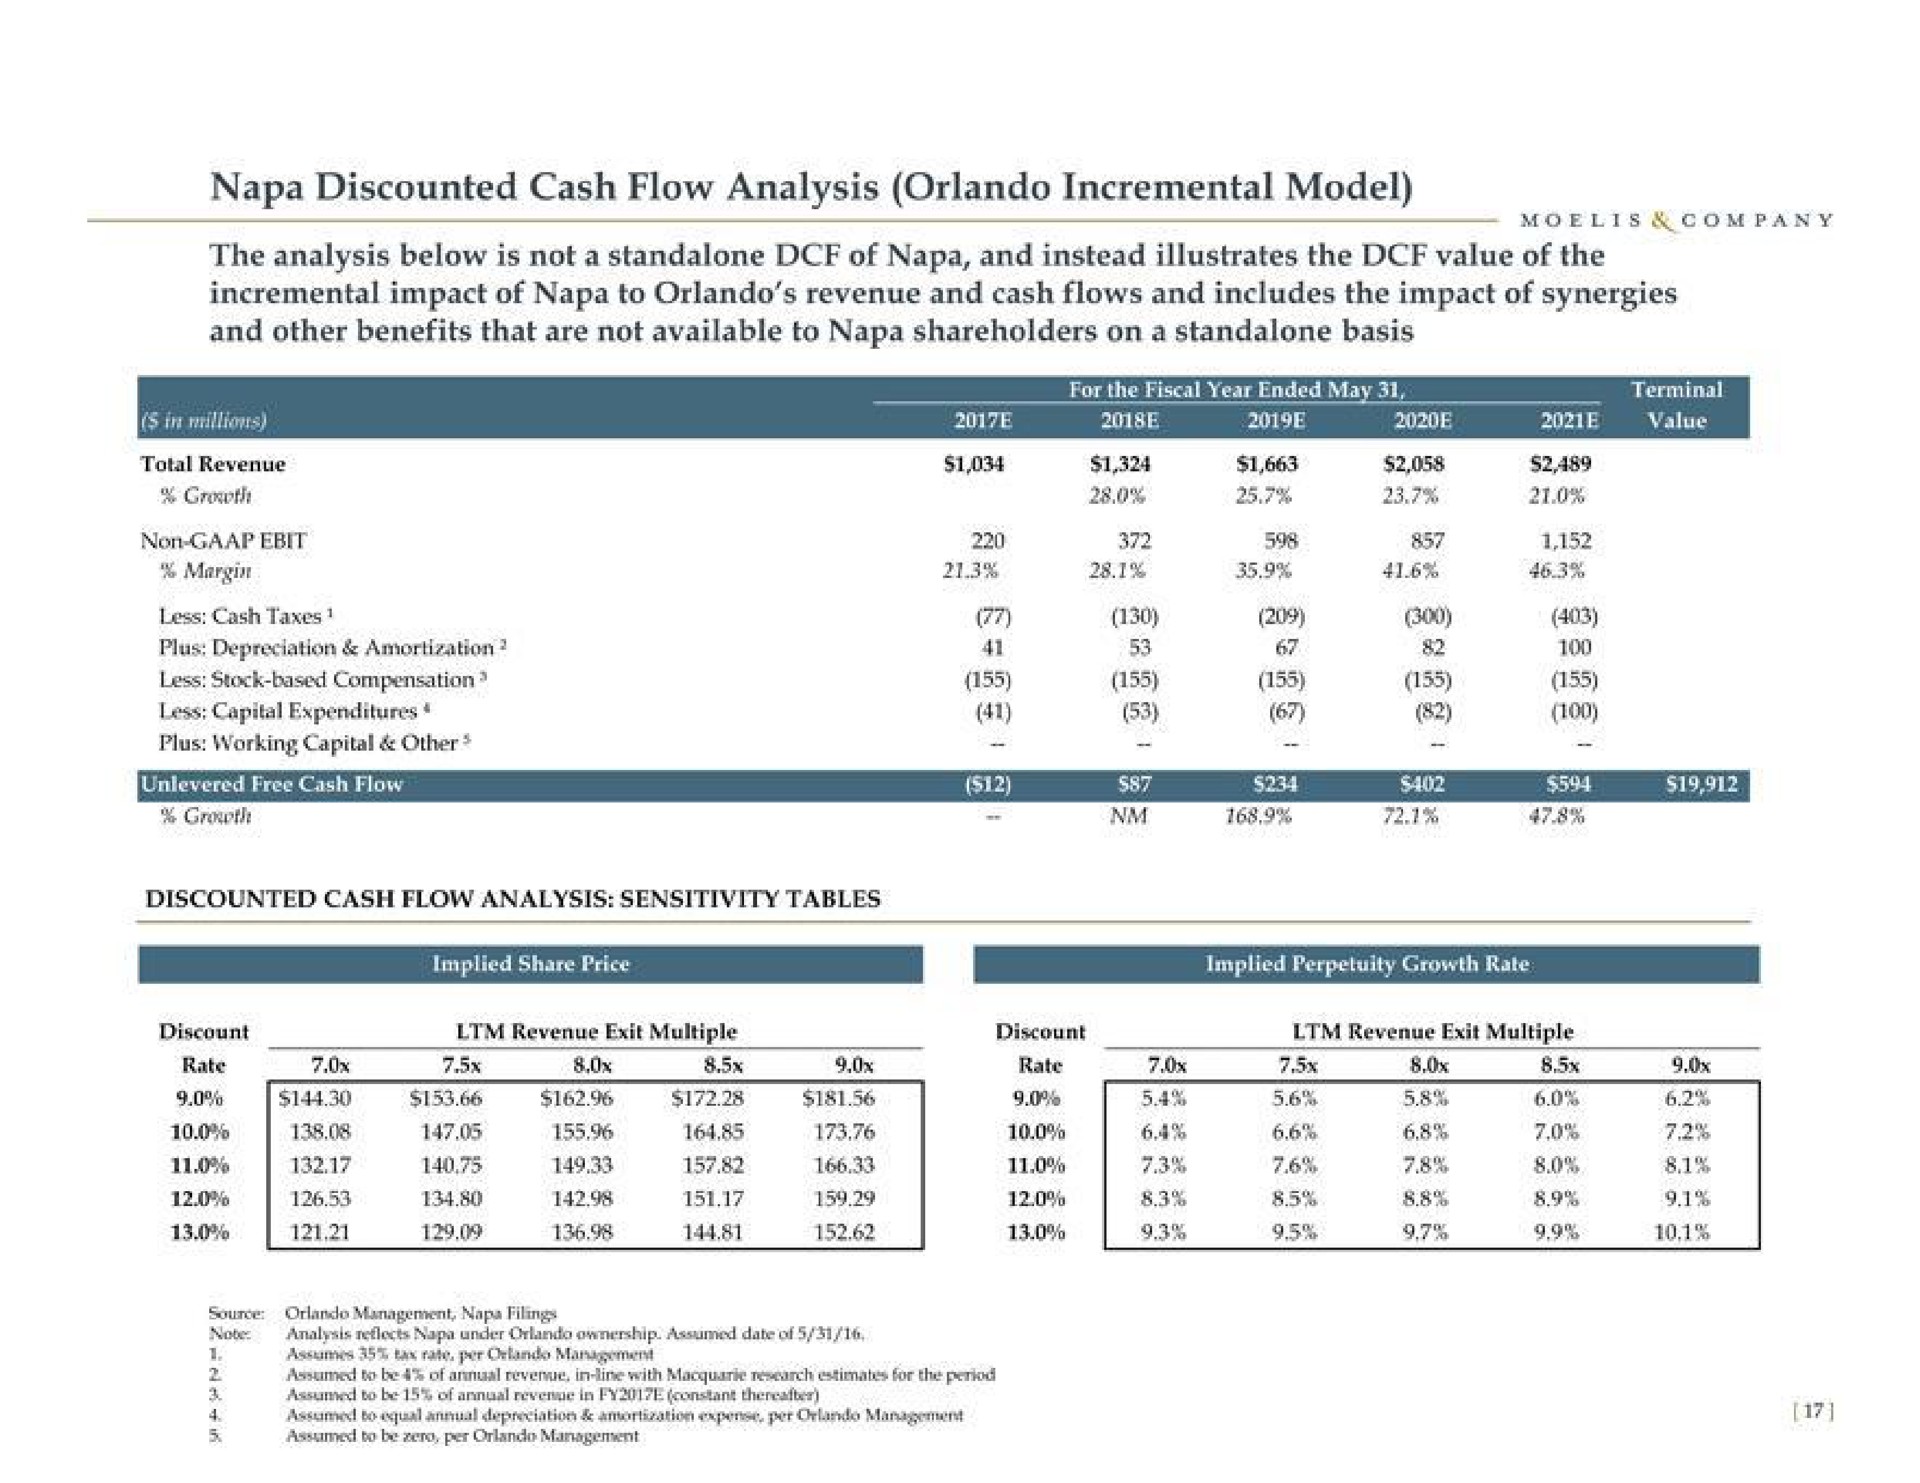 napa discounted cash flow analysis incremental model incremental impact of napa to revenue and cash flows and includes the impact of synergies | Moelis & Company